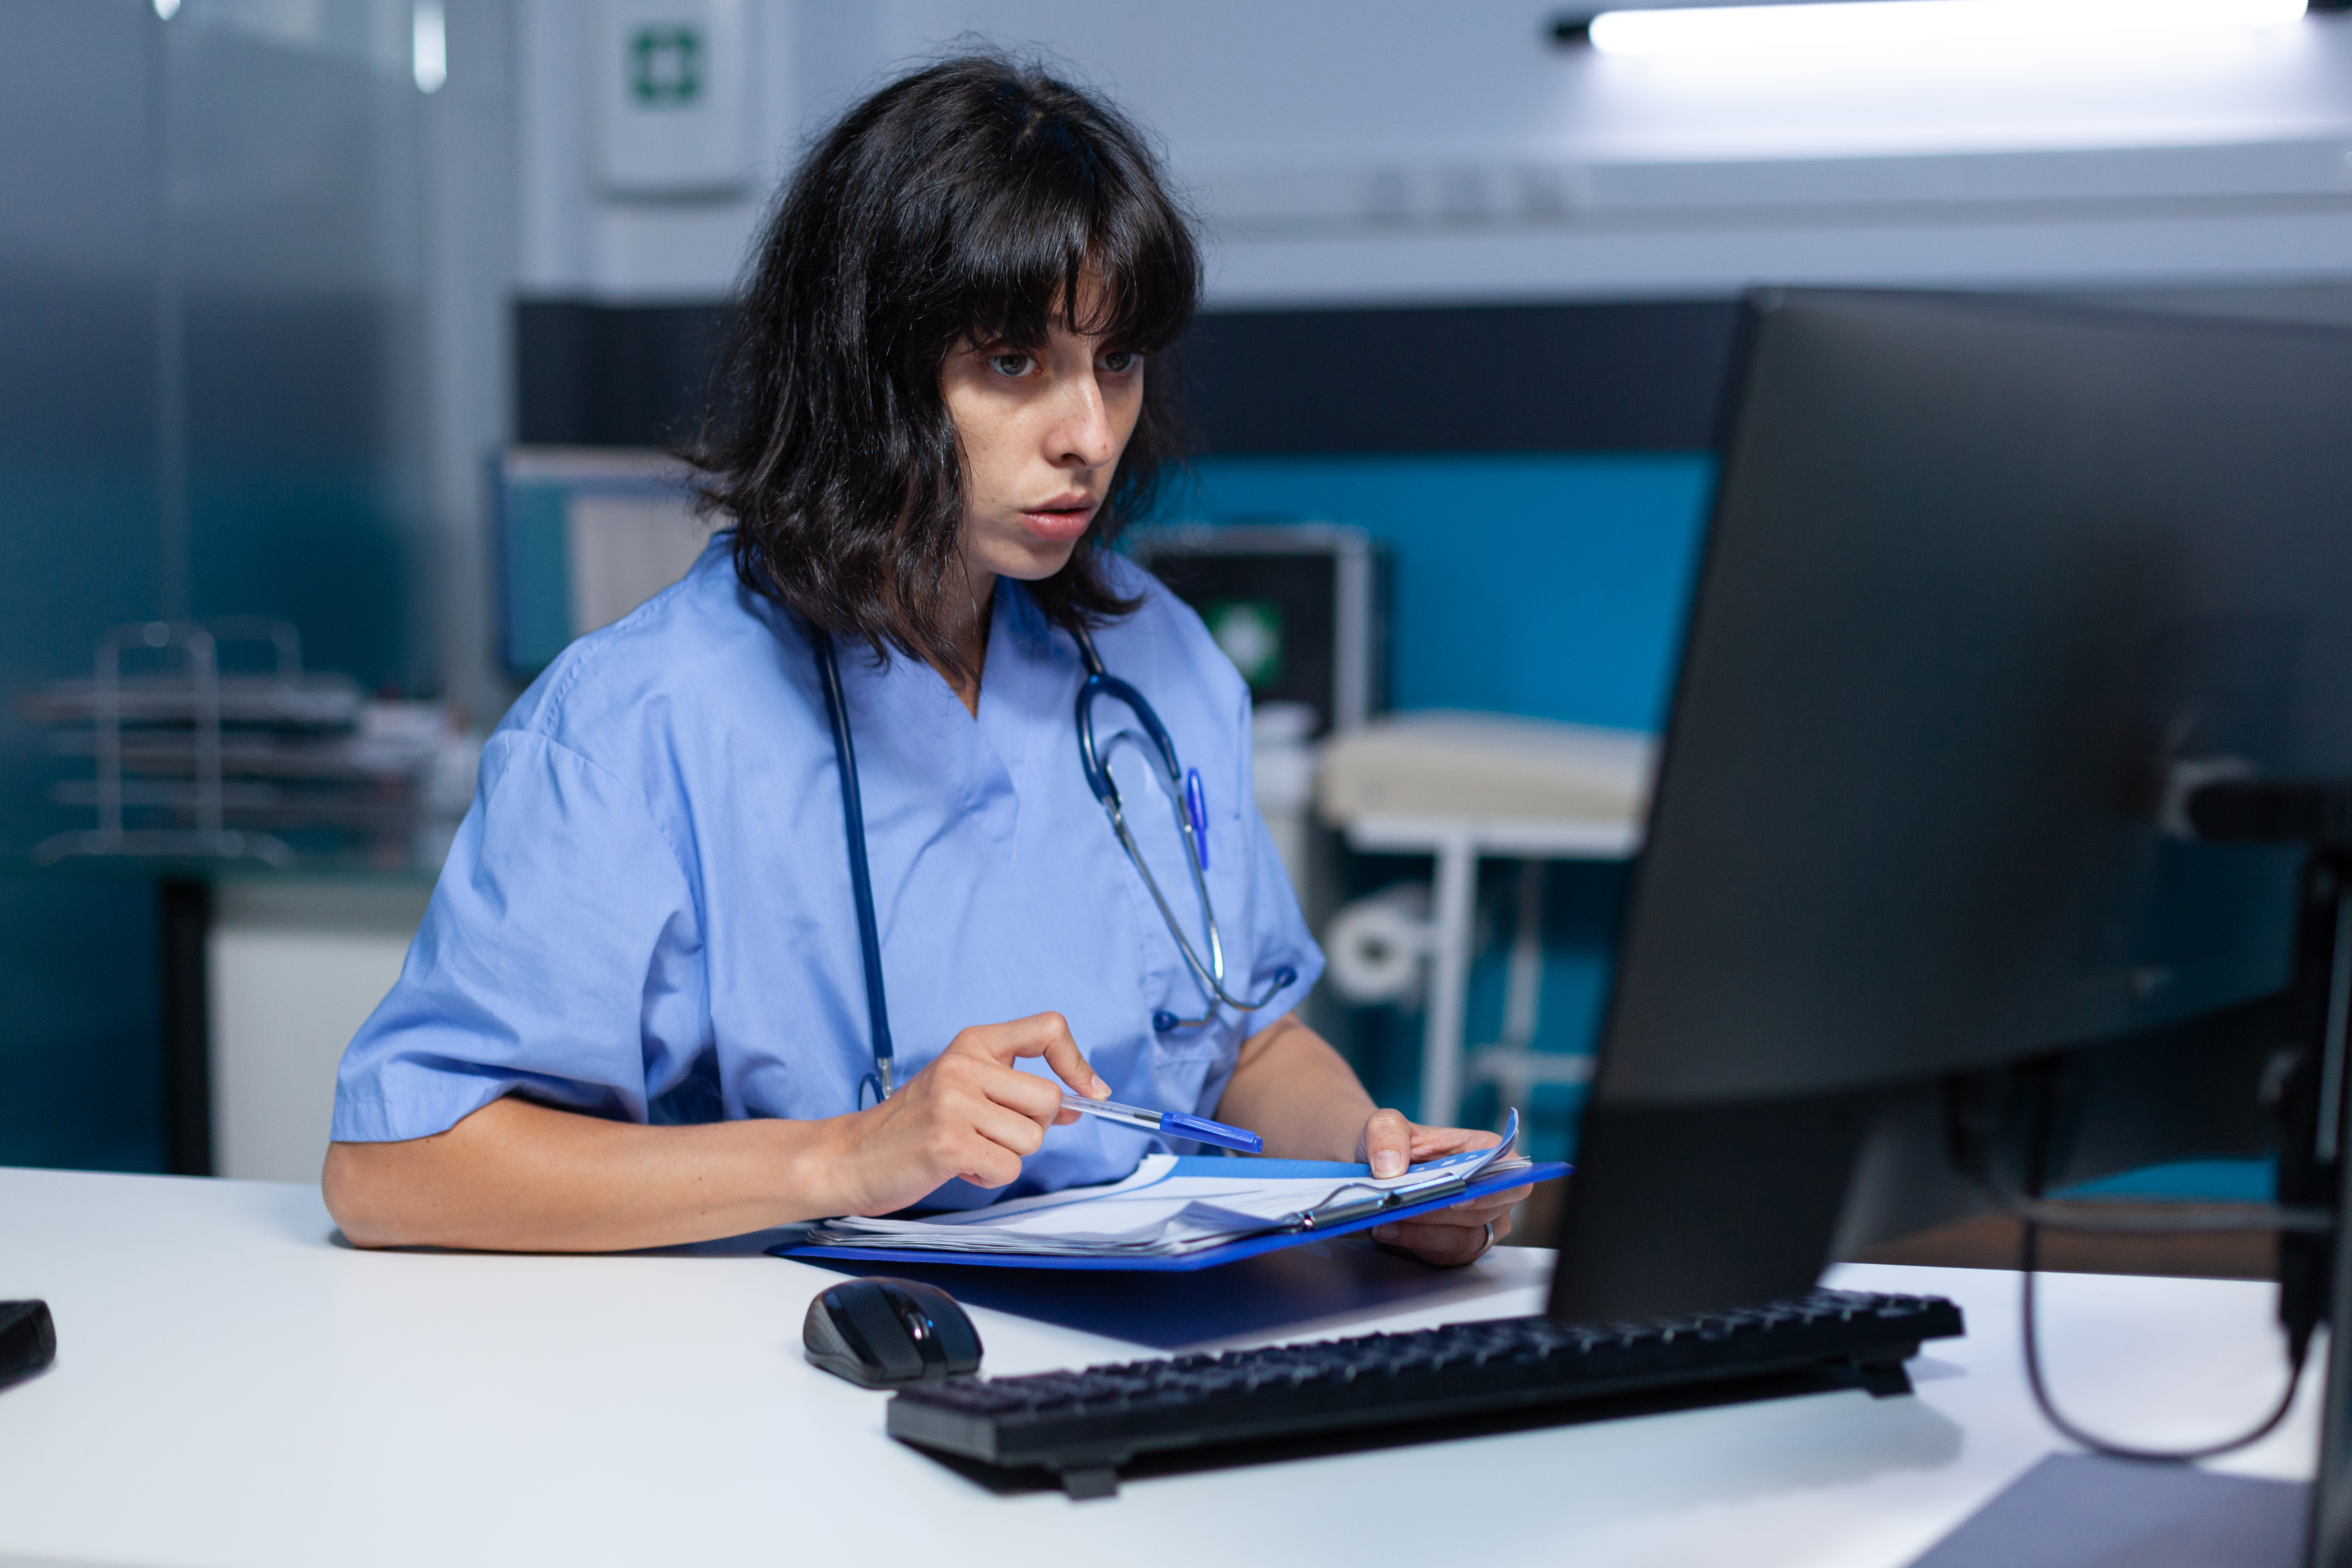 Medical assistant analyzing documents and files on monitor